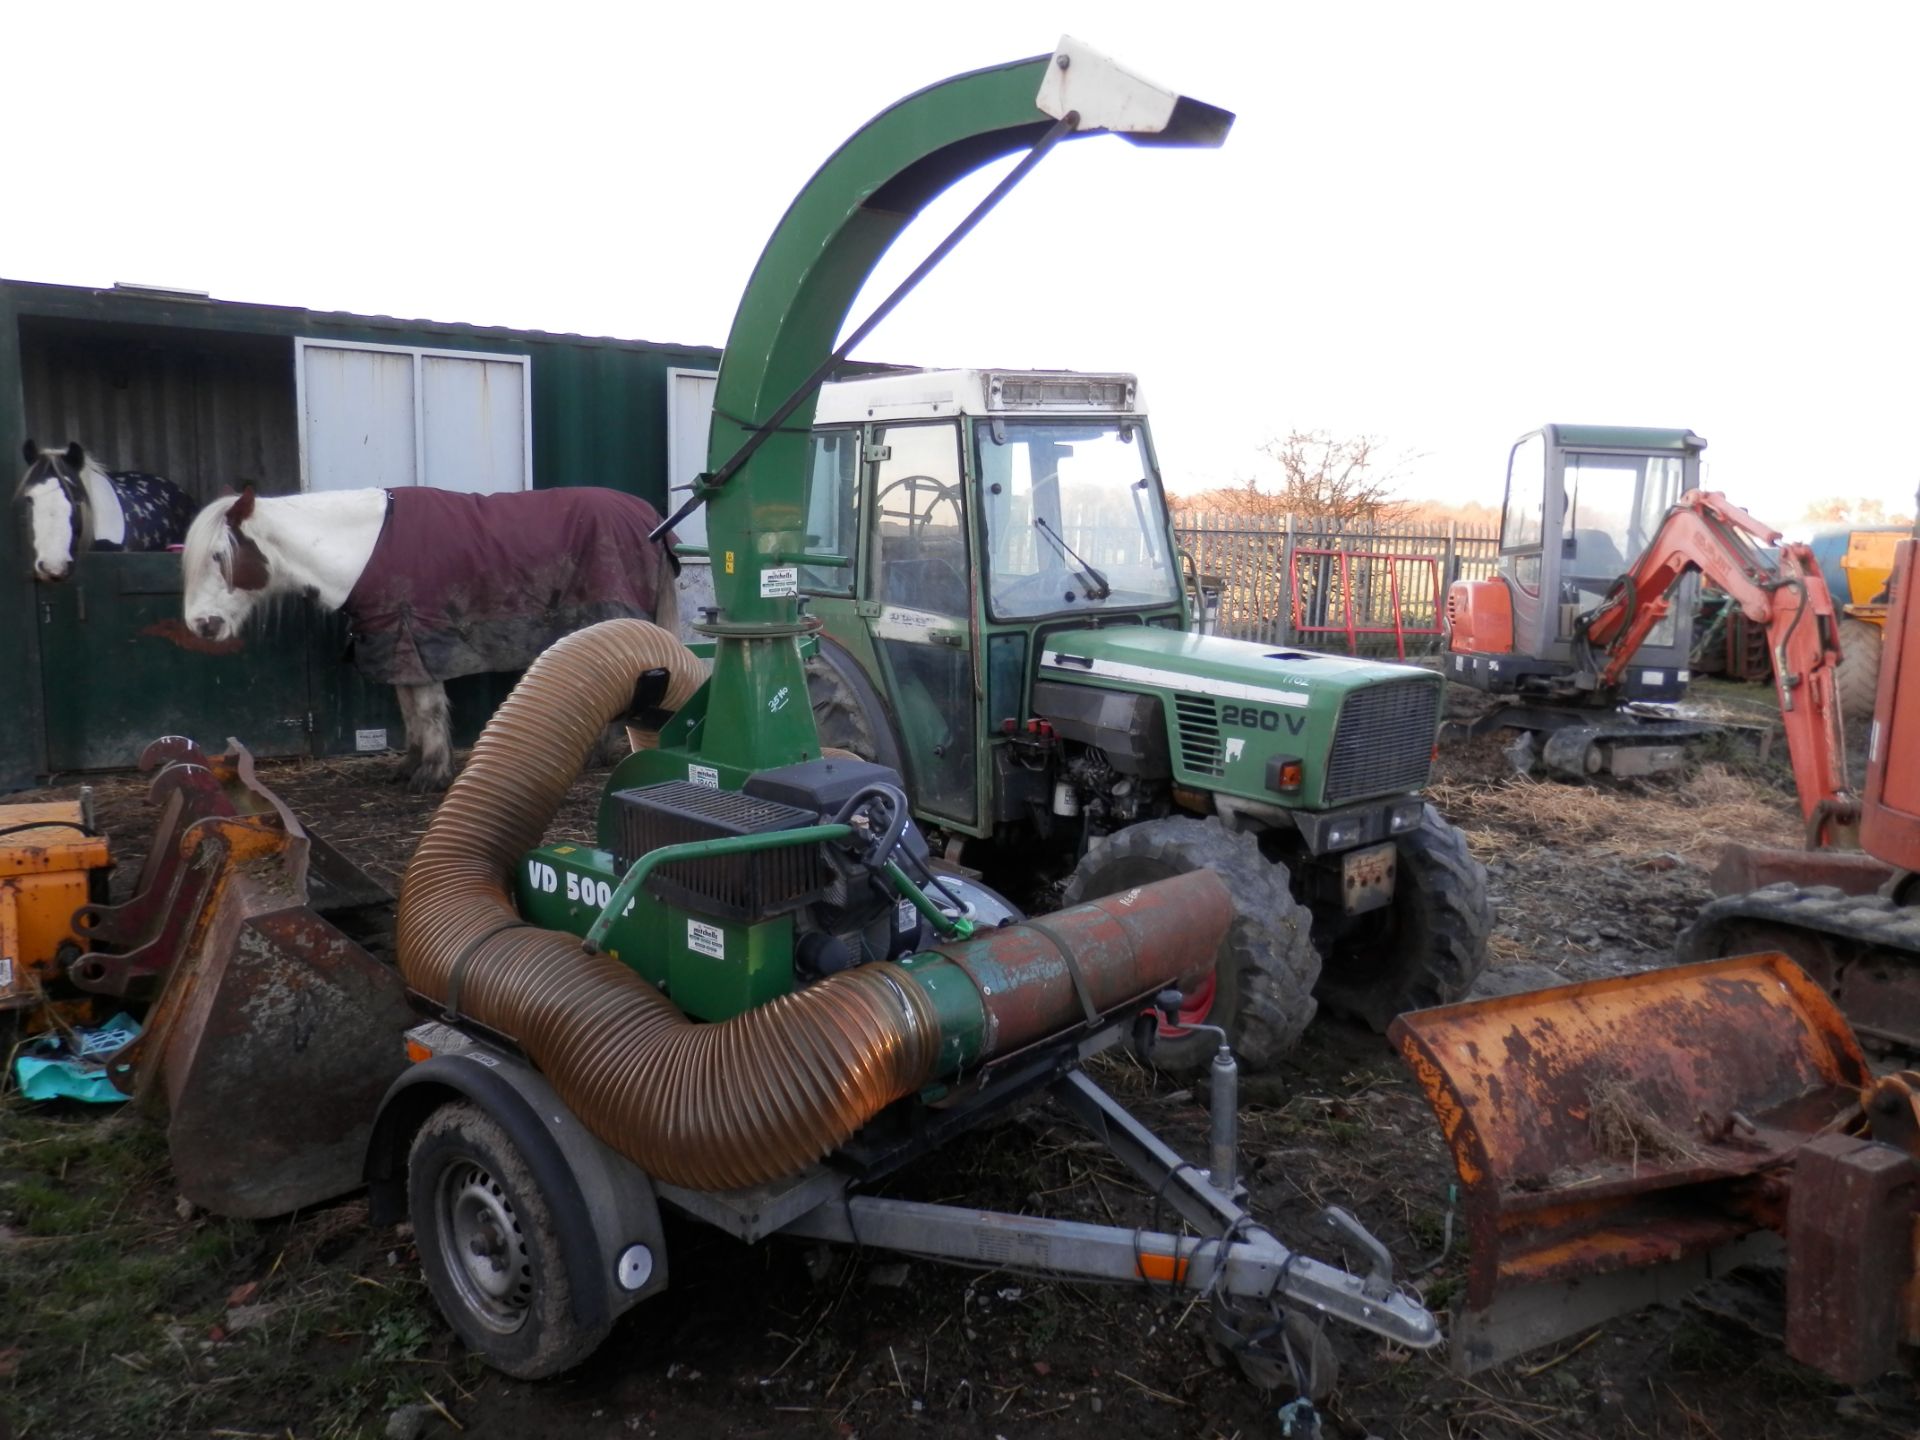 2007 MAJOR GRASSCARE VD 500P HORSE MANURE HOOVER/BLOWER, ALL WORKING.